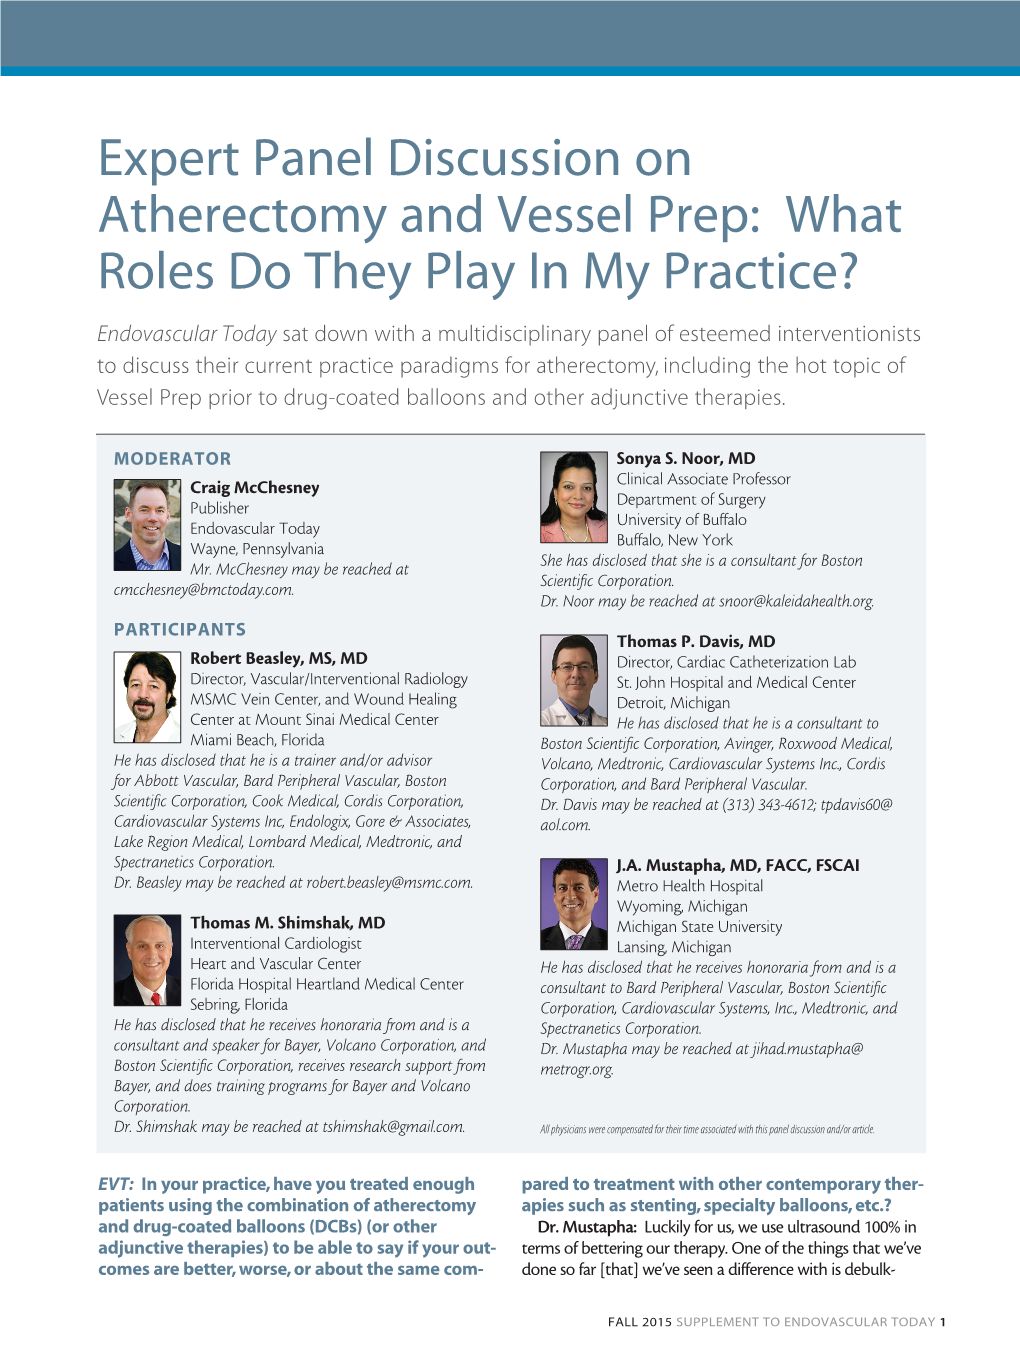 Expert Panel Discussion on Atherectomy and Vessel Prep